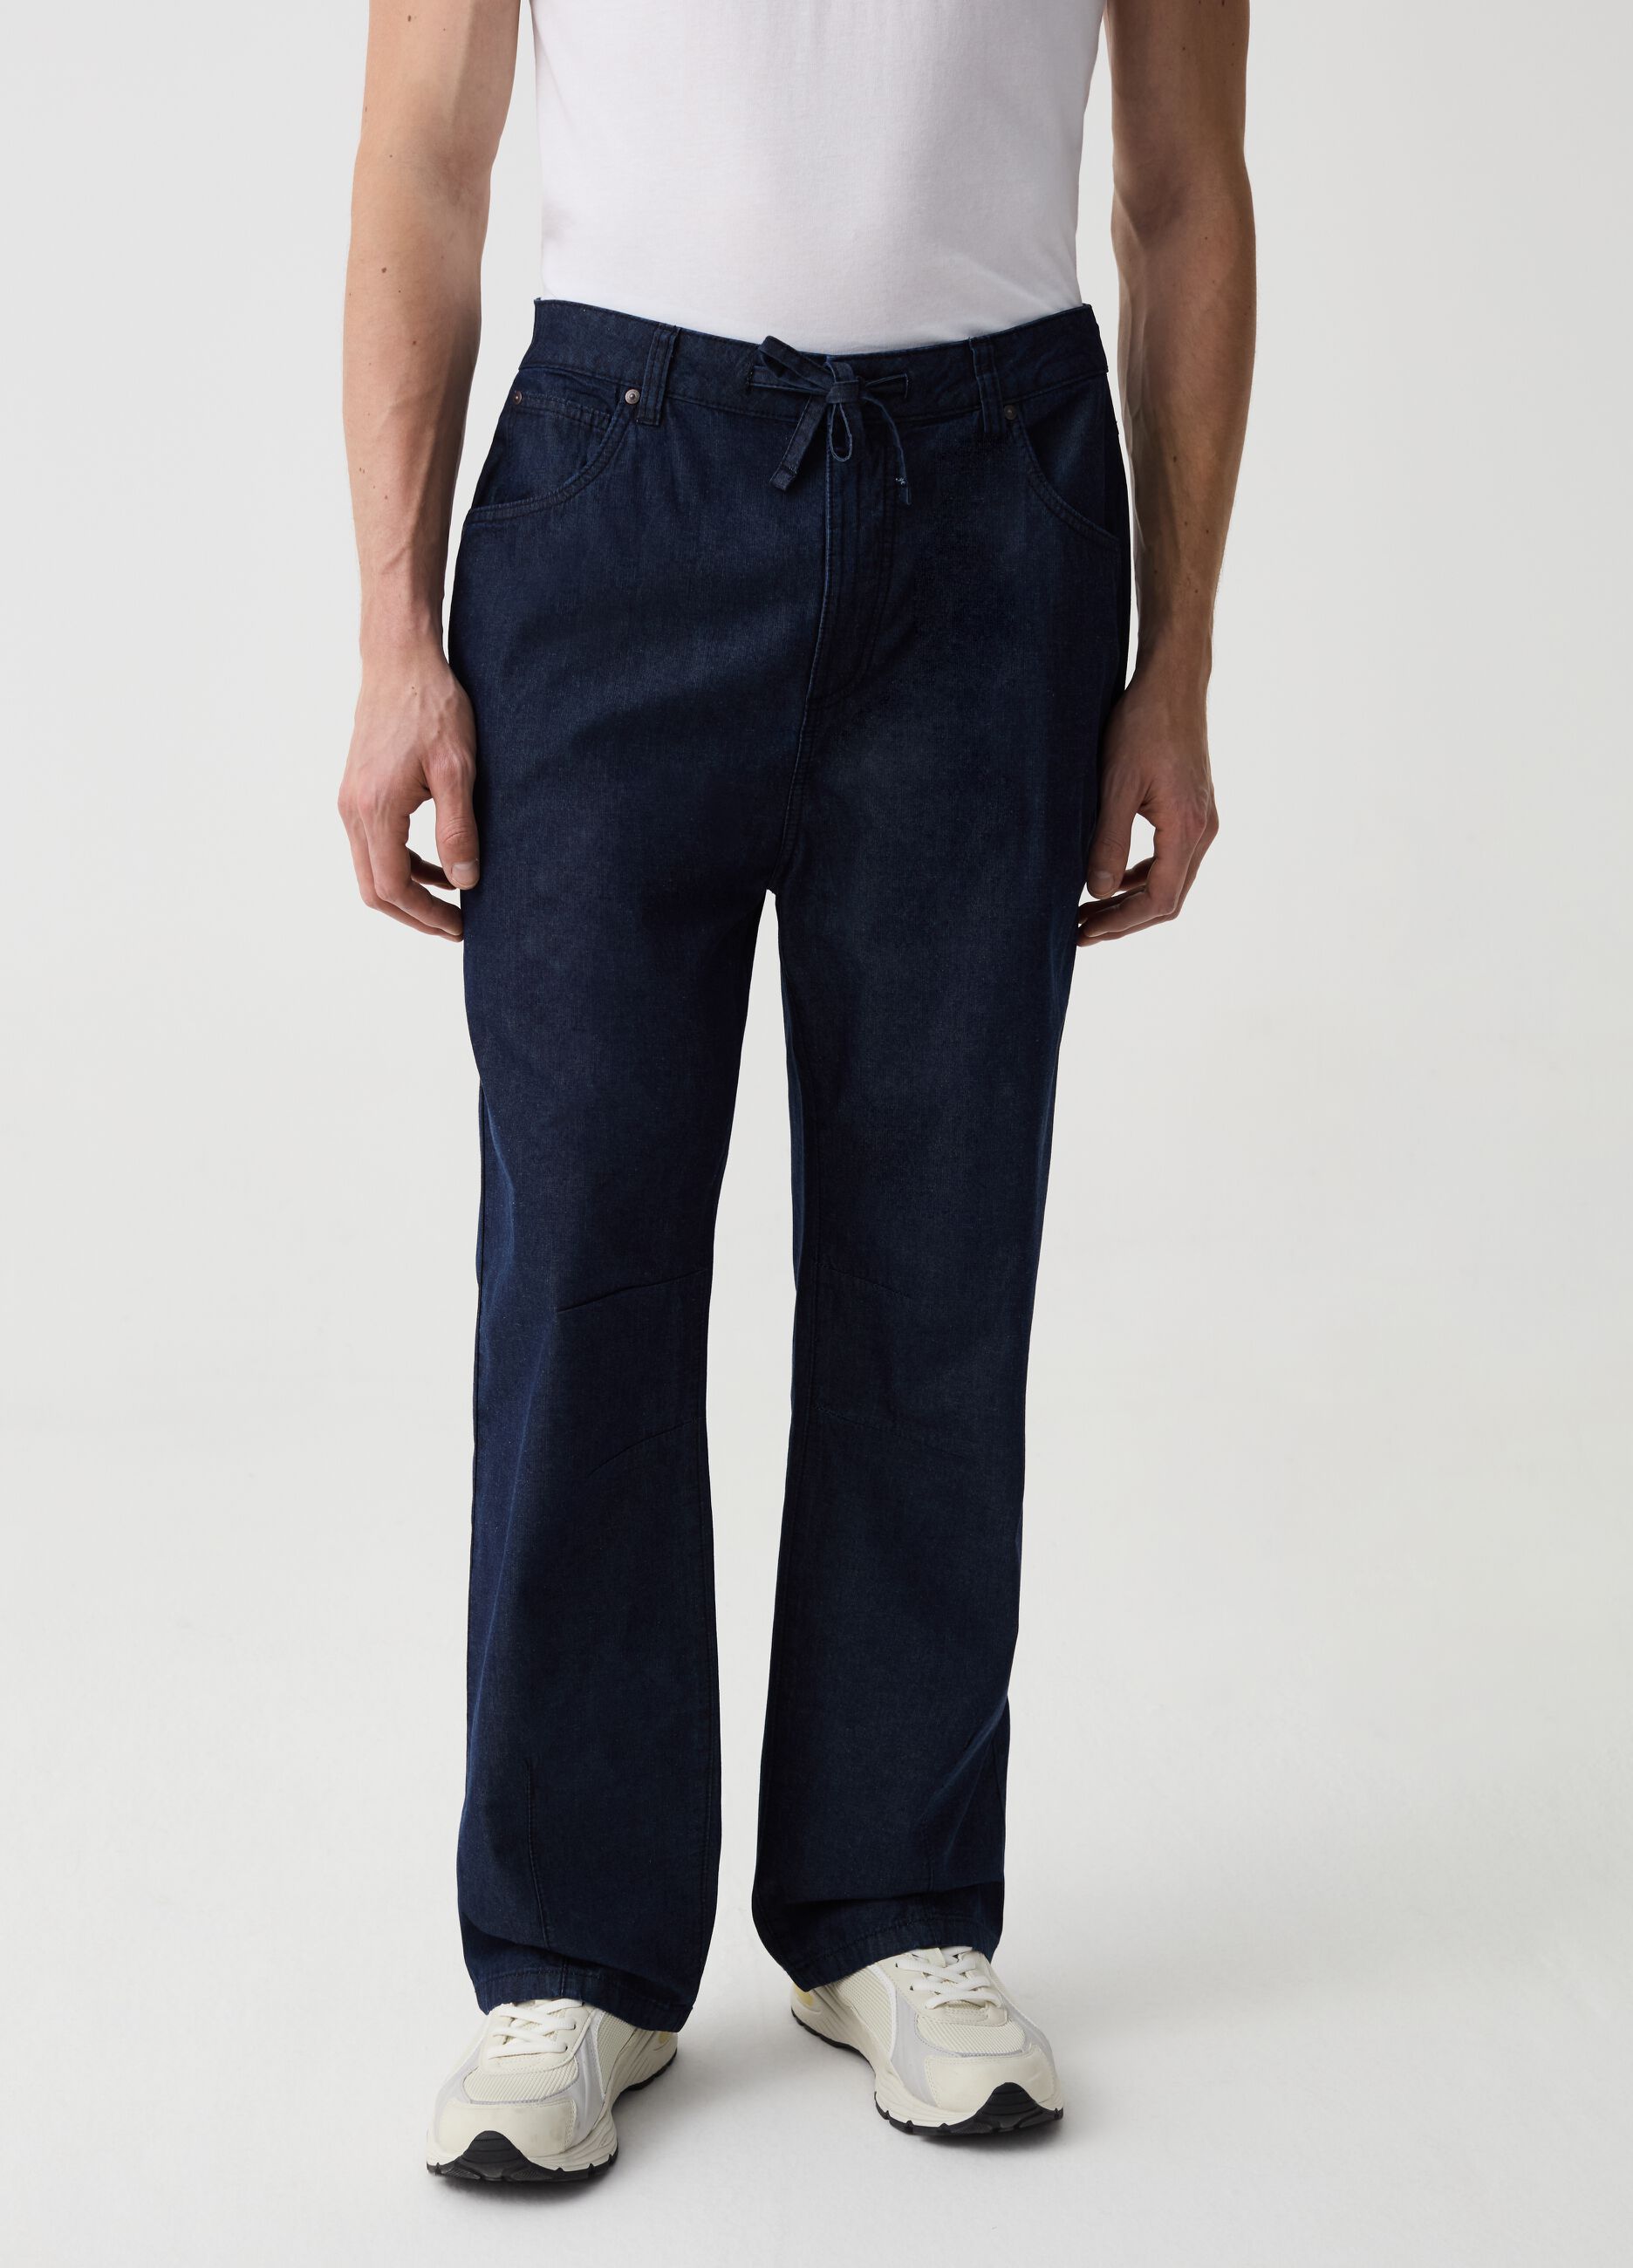 Parachute jeans with drawstring